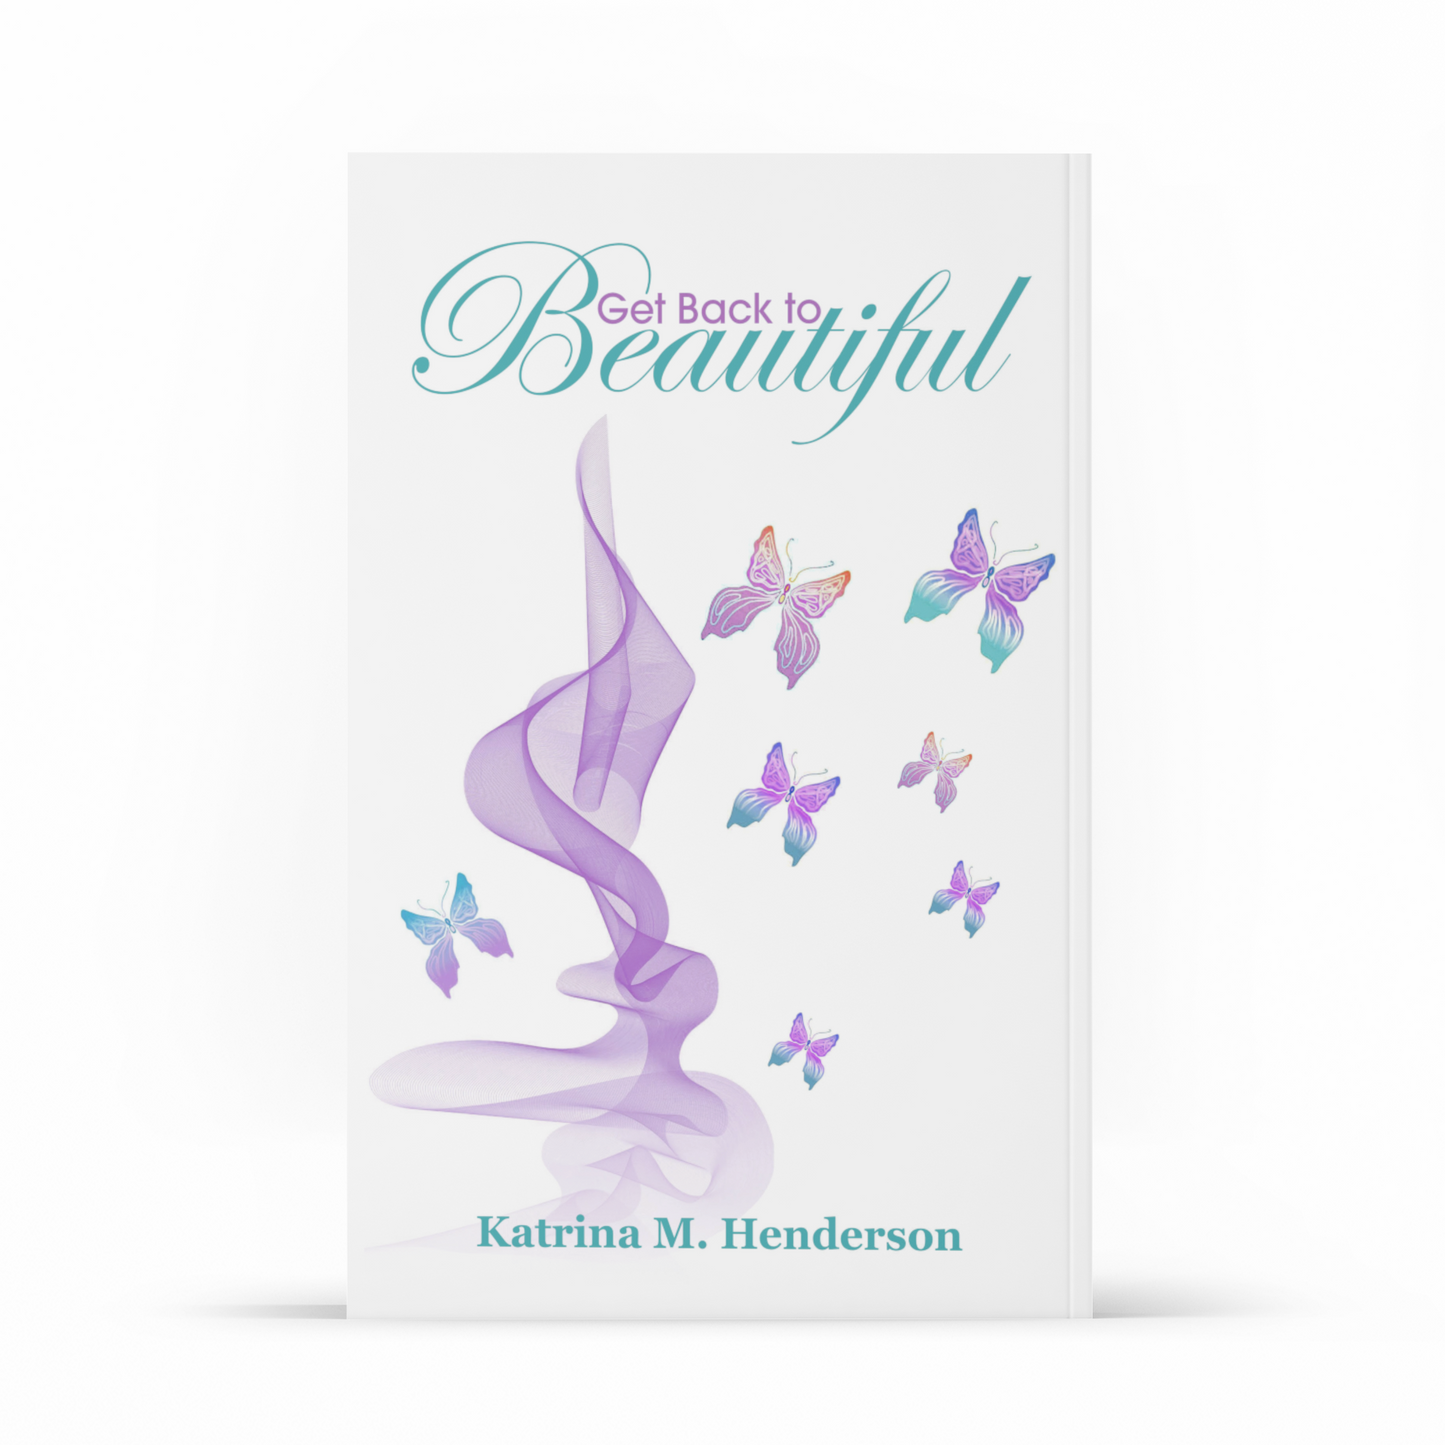 Get Back to Beautiful (ebook)